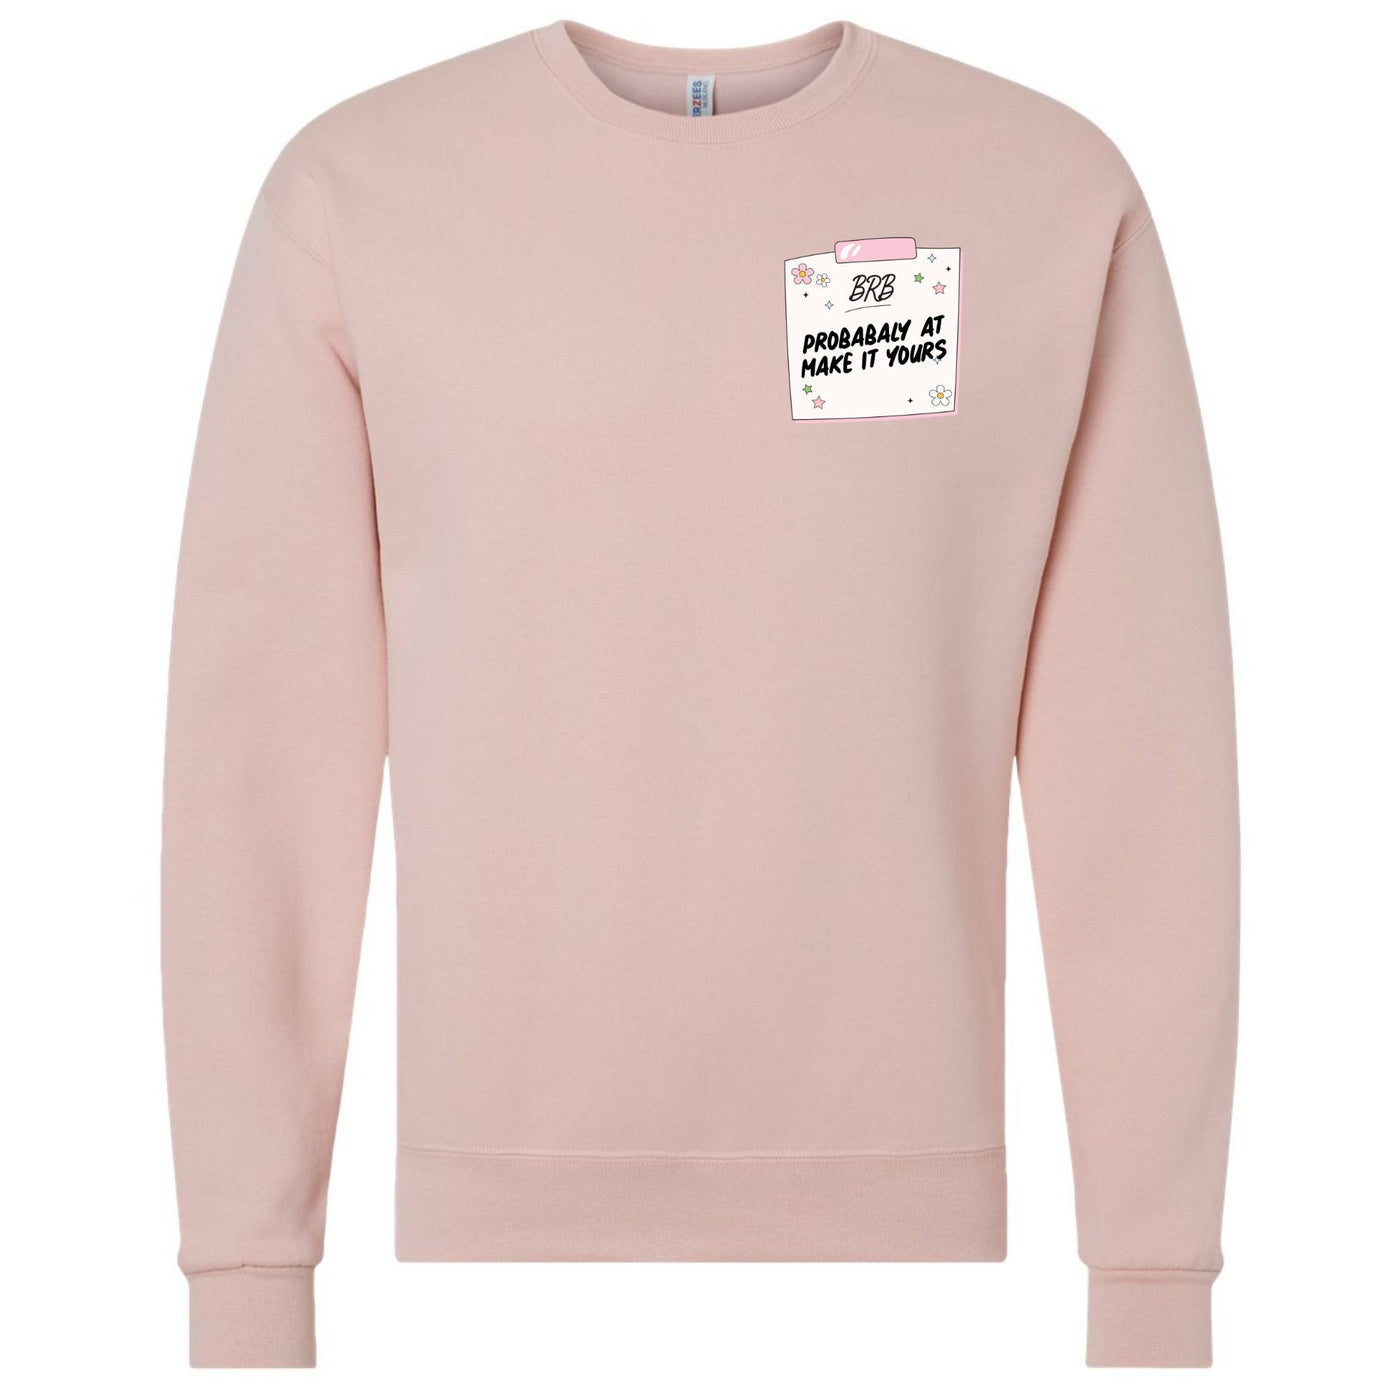 Make It Yours™ 'BRB, Probably At' Crewneck Sweatshirt